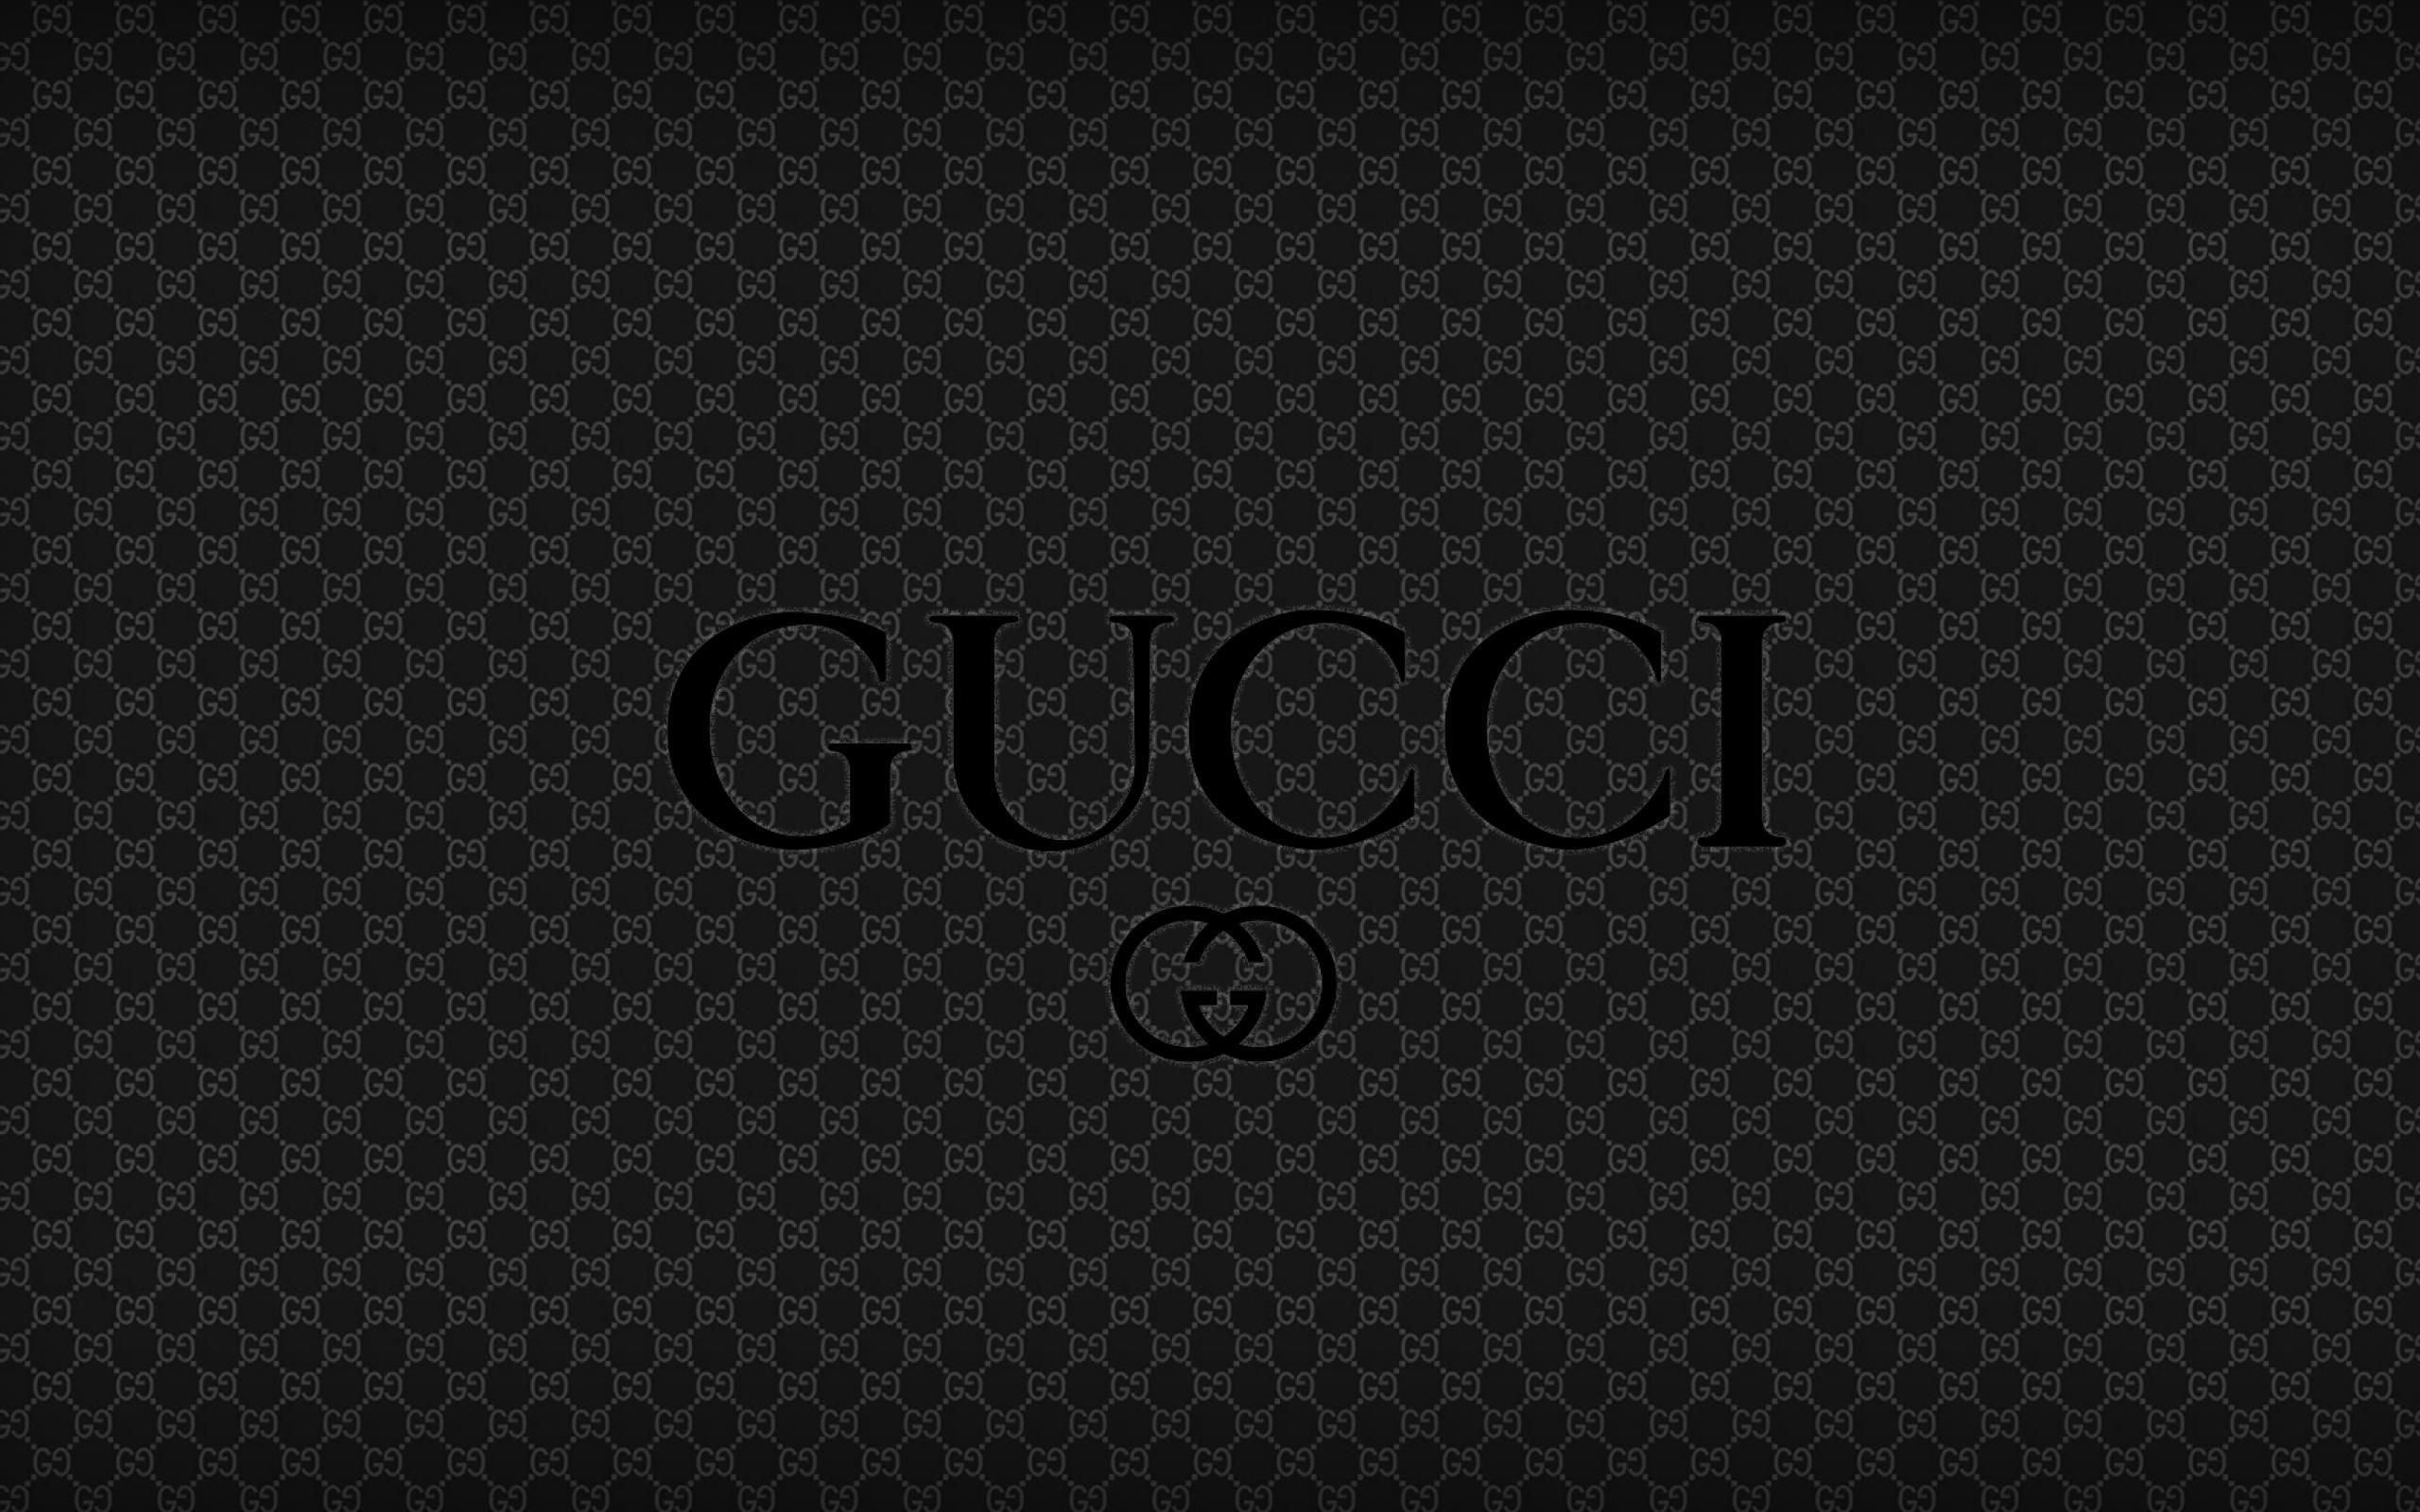 48+] Gucci iPhone Wallpaper Supreme on WallpaperSafari  Gucci wallpaper  iphone, Gold wallpaper iphone, Supreme iphone wallpaper